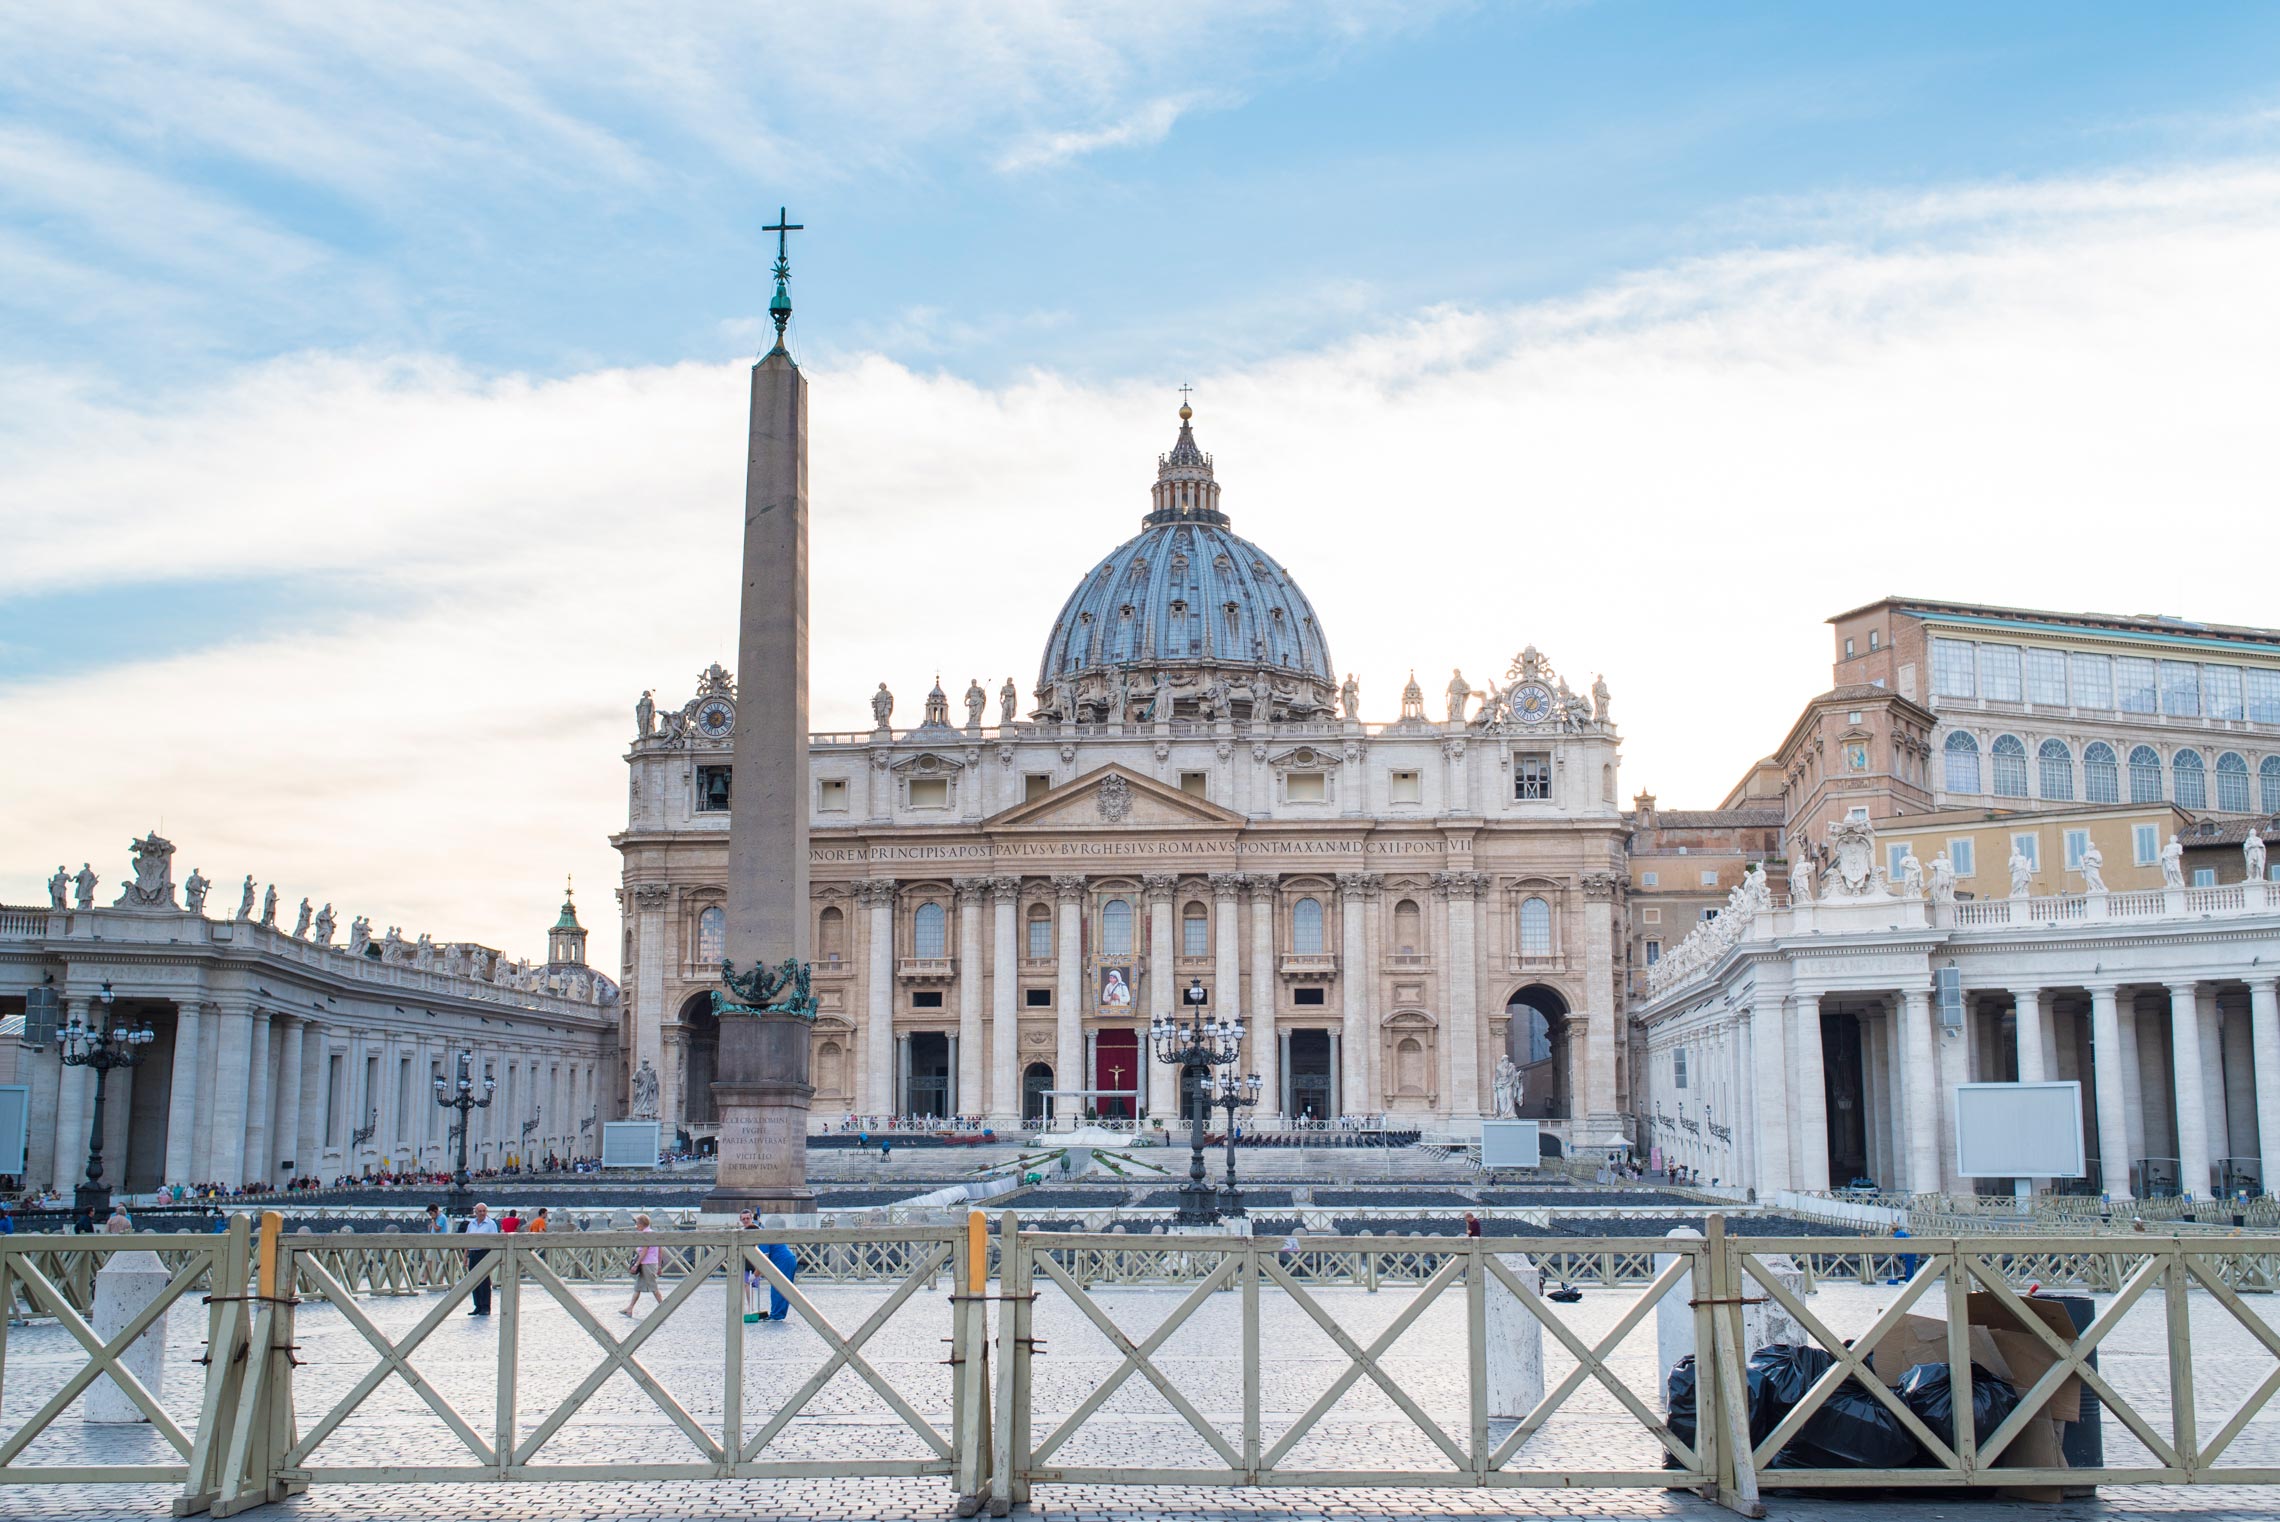 The Best Free Things to do in Rome, St Peter's Basilica